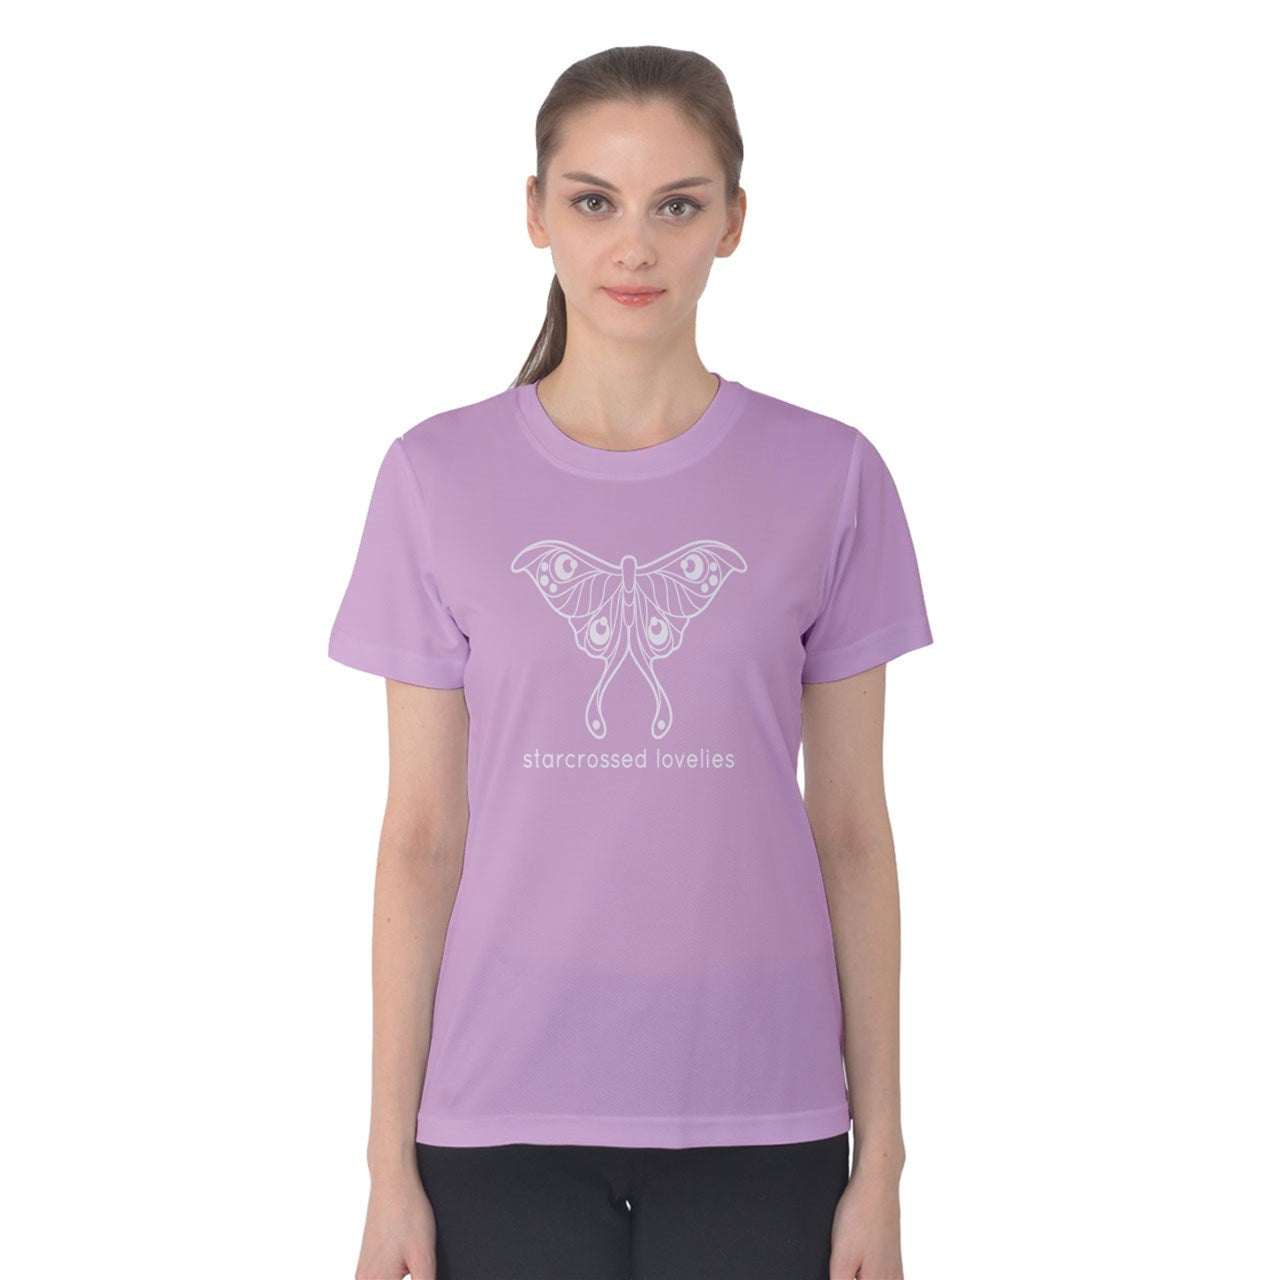 starcrossed lovelies T-shirt in Pink - Lolita Collective